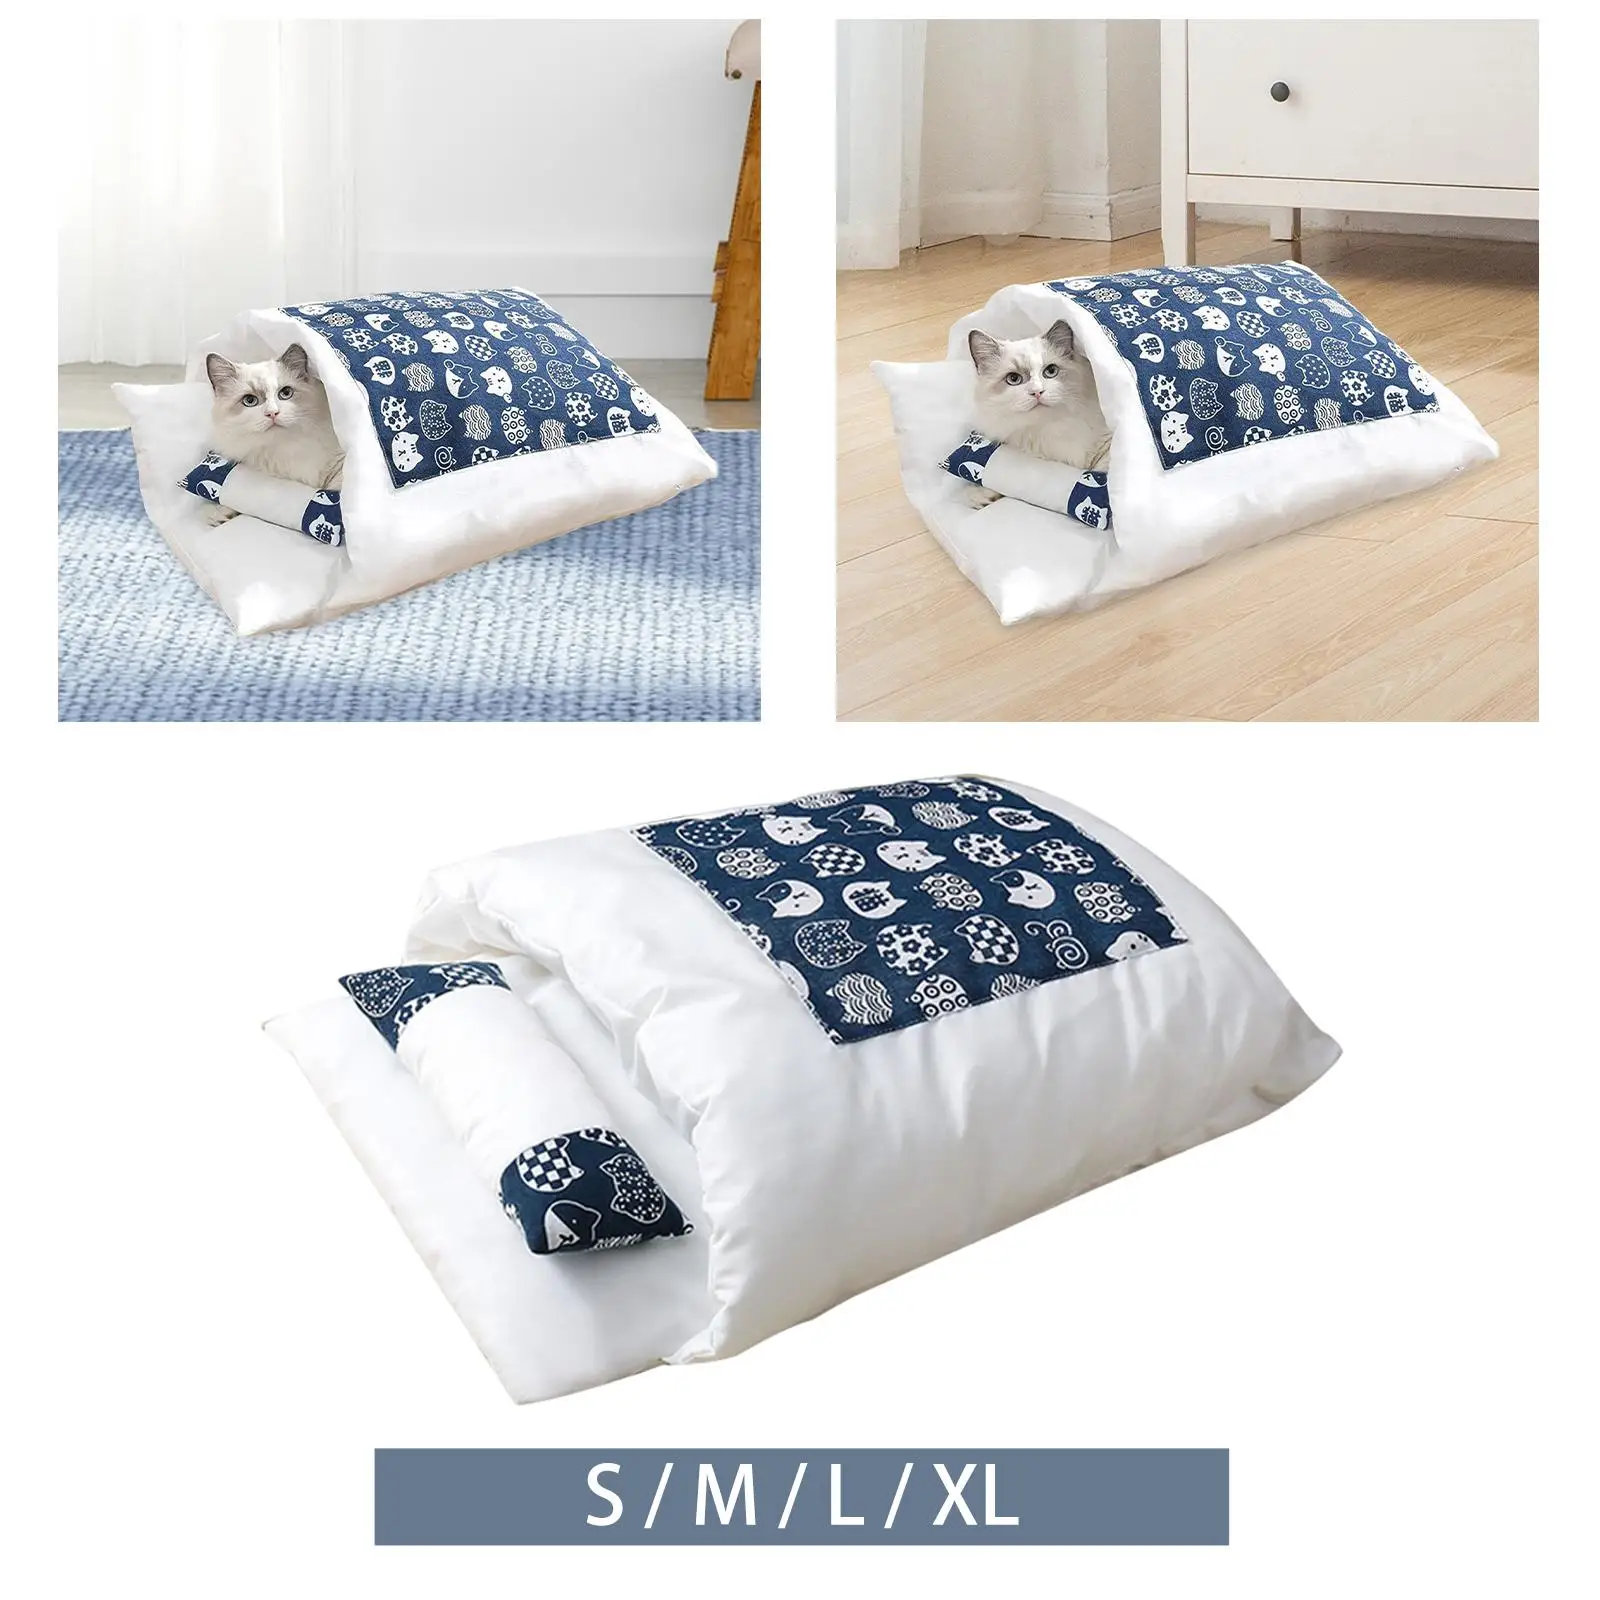 Cat Beds Snuggle Sack Pets Supplies Shelter Kitten House Removable Cute Plush Cat Sleeping Bags for Puppy Kitten Kitty Rabbit